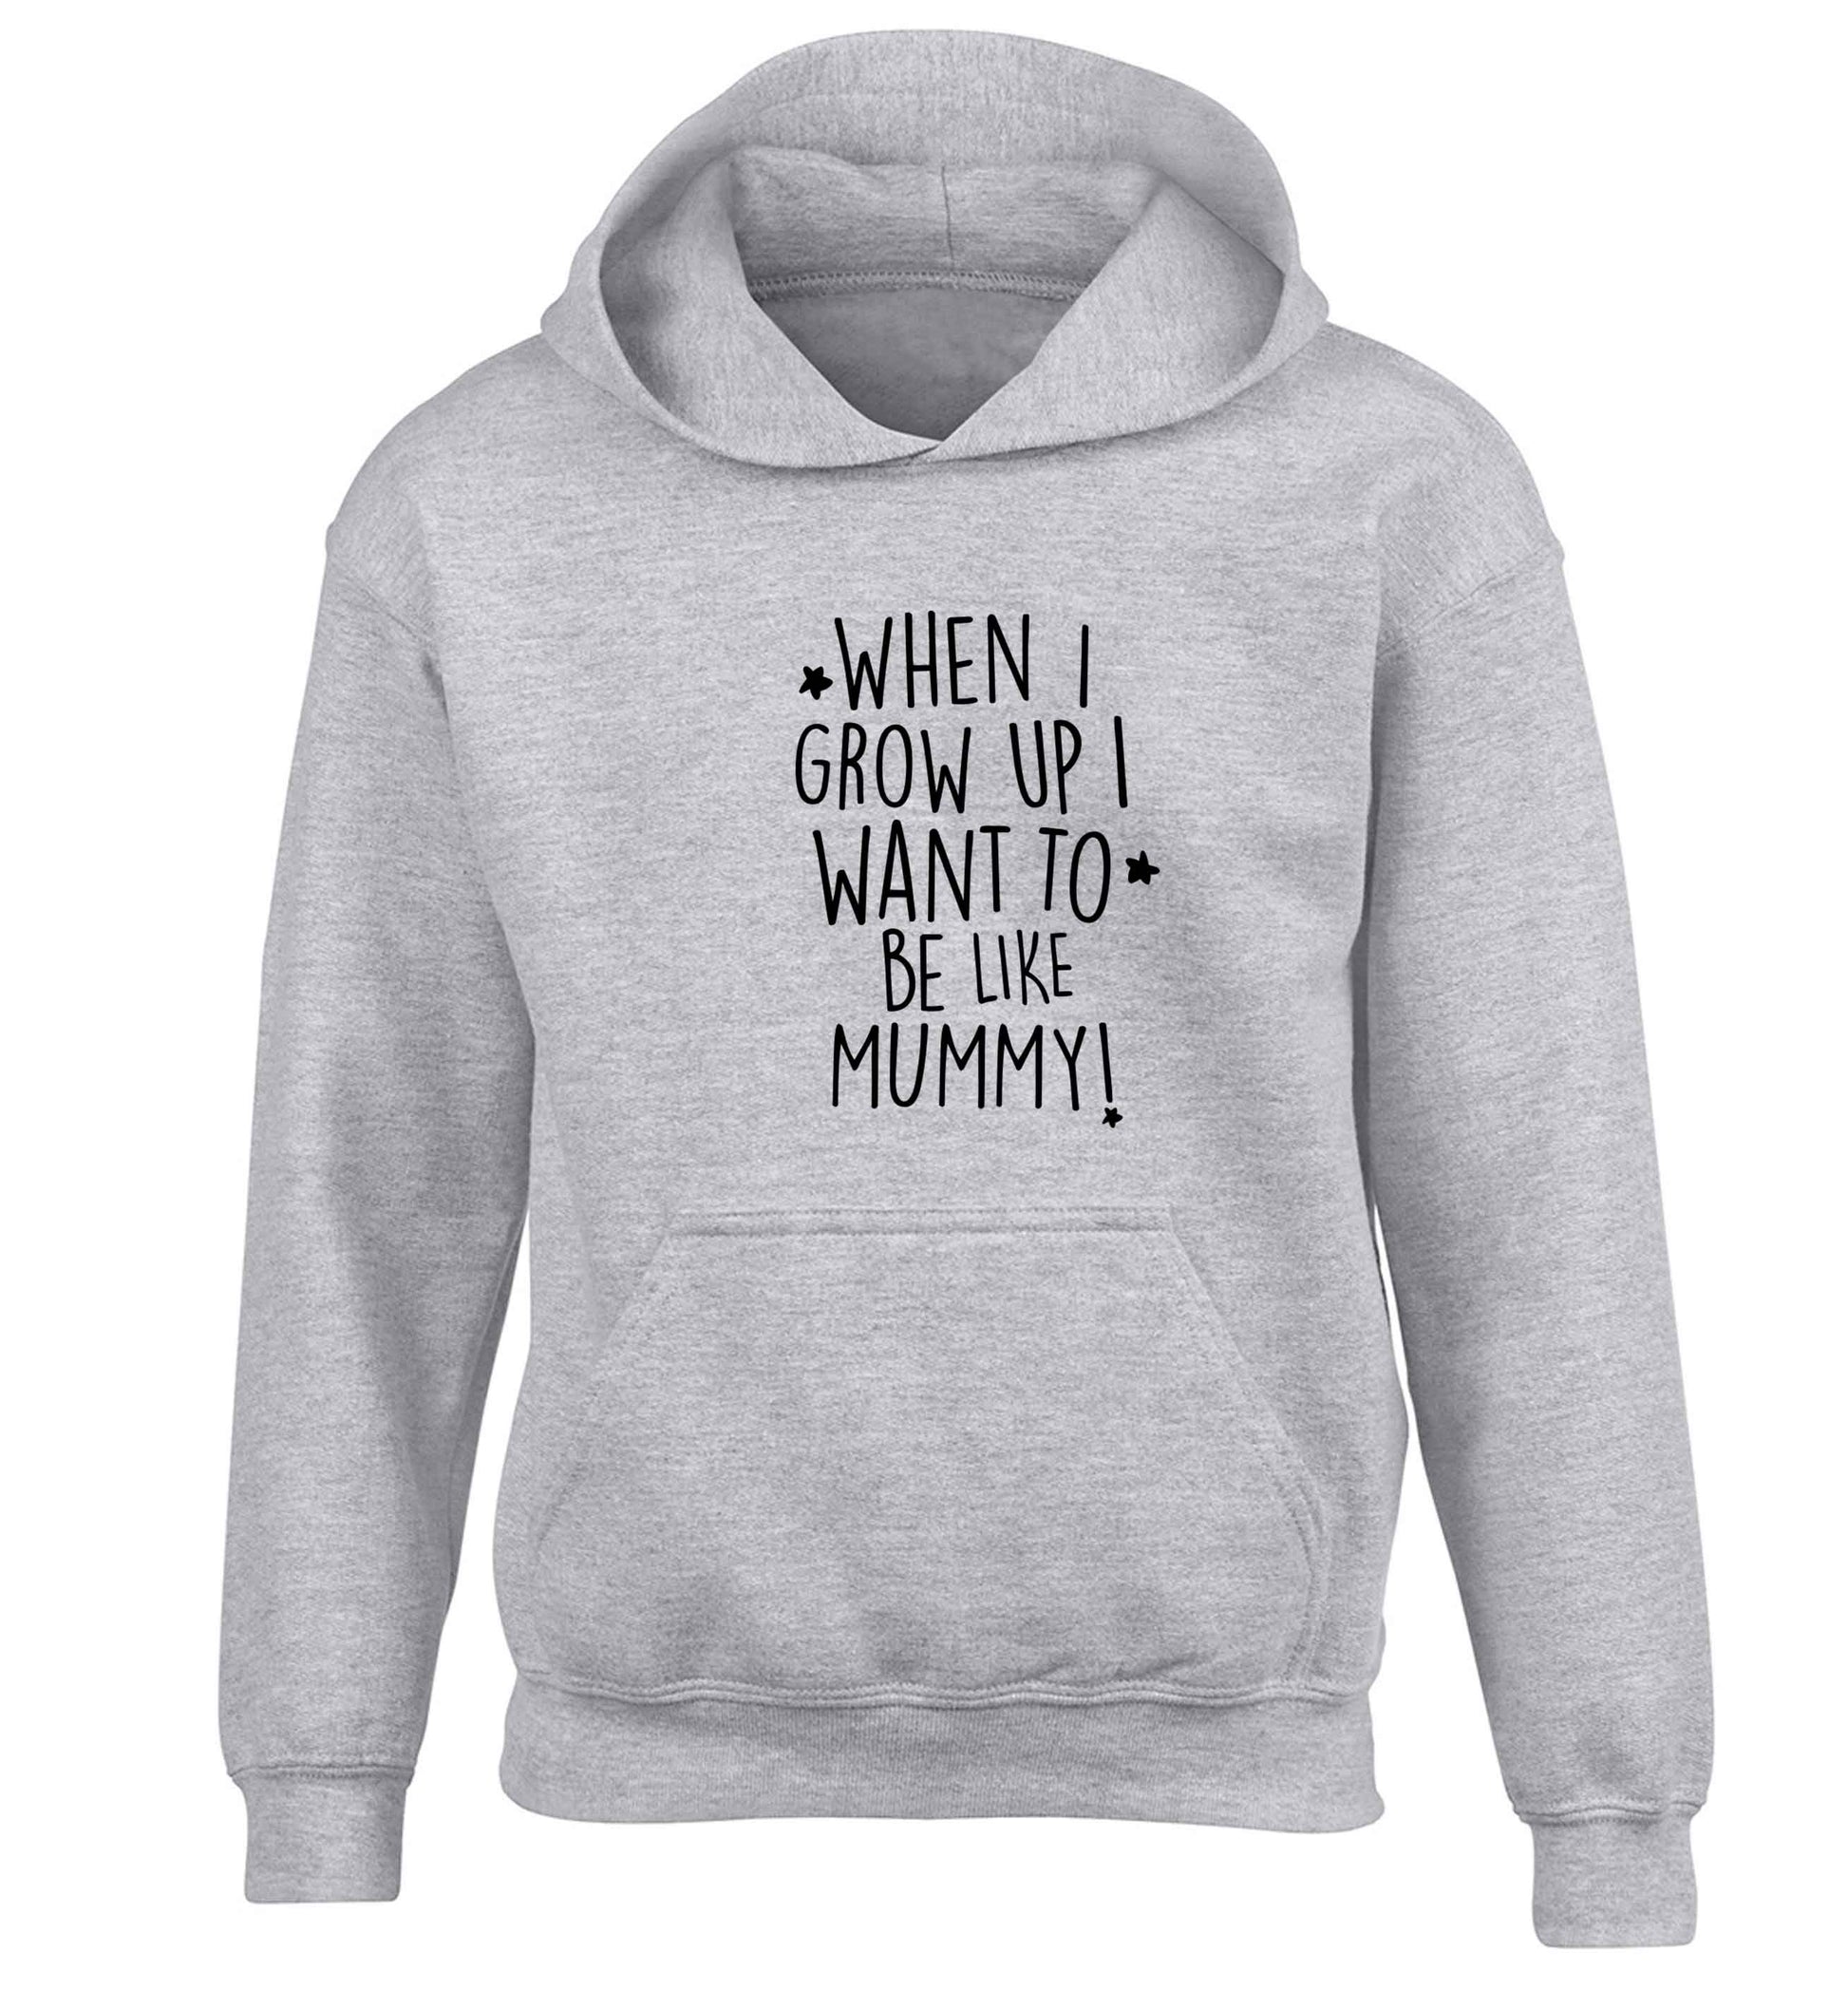 When I grow up I want to be like my mummy children's grey hoodie 12-13 Years